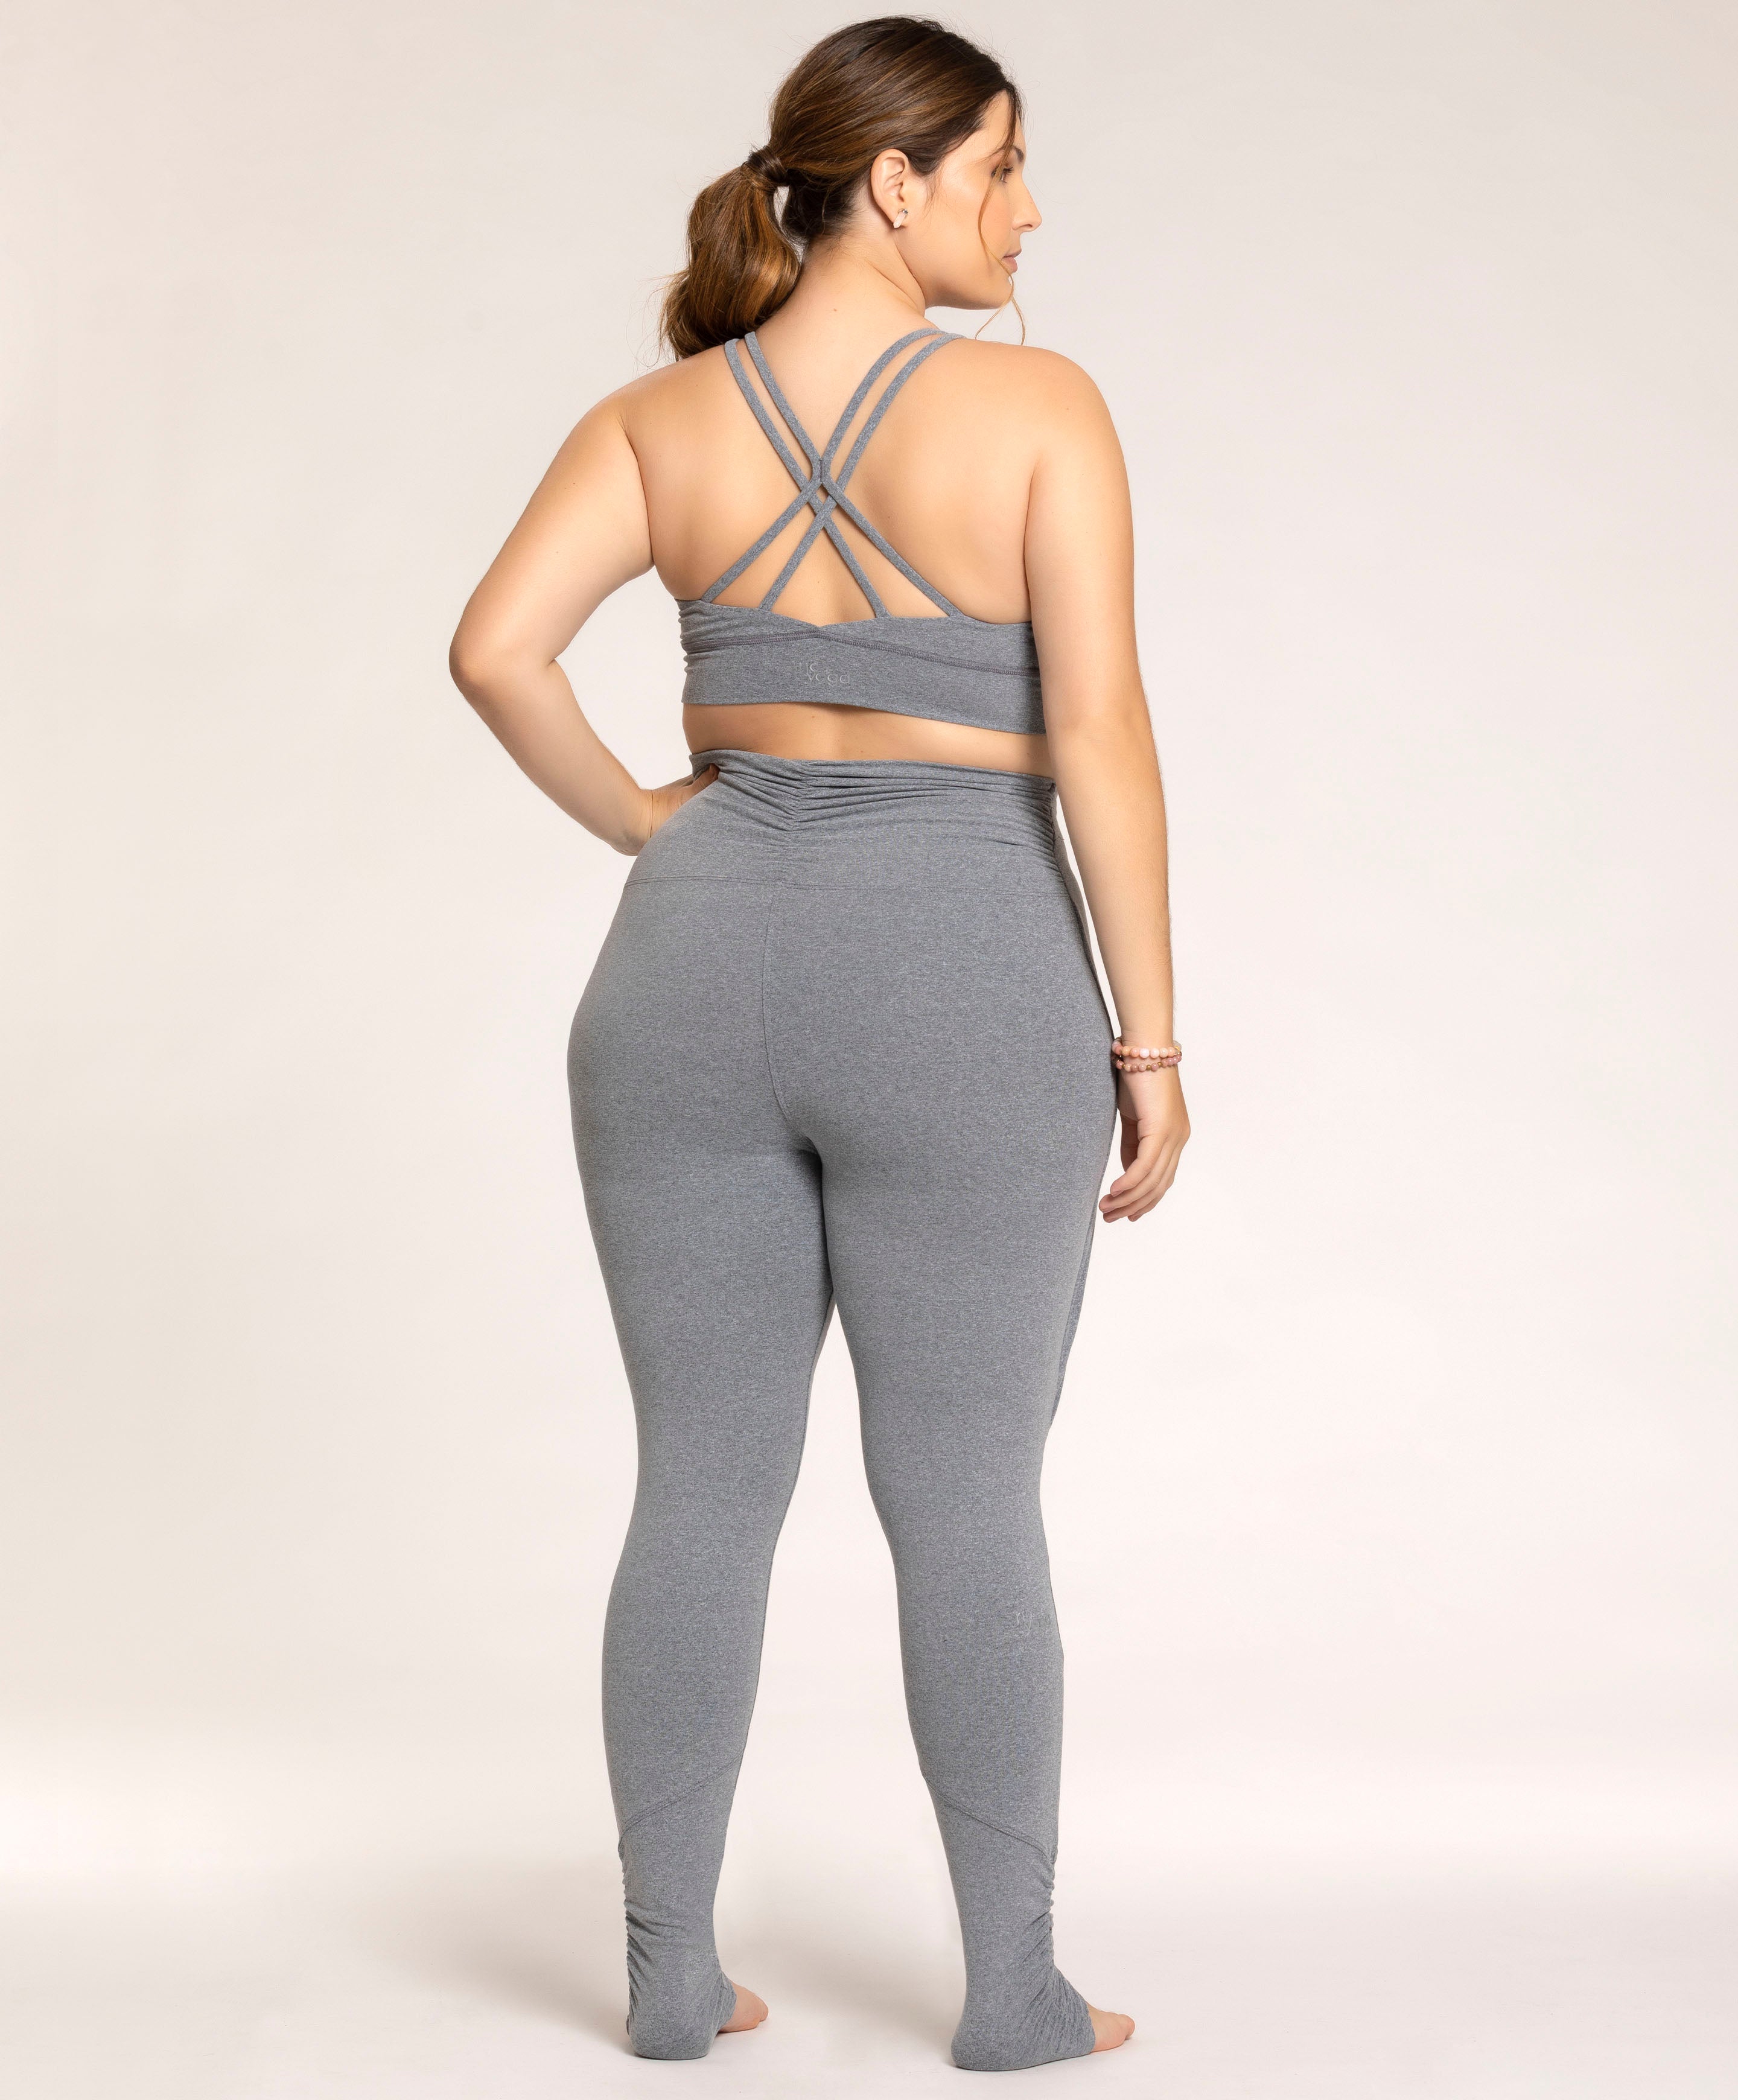 YOGA PANTS LEGGINGS PLUS SIZE WIDE WAISTBAND IN GRAY – Life is Chic Boutique